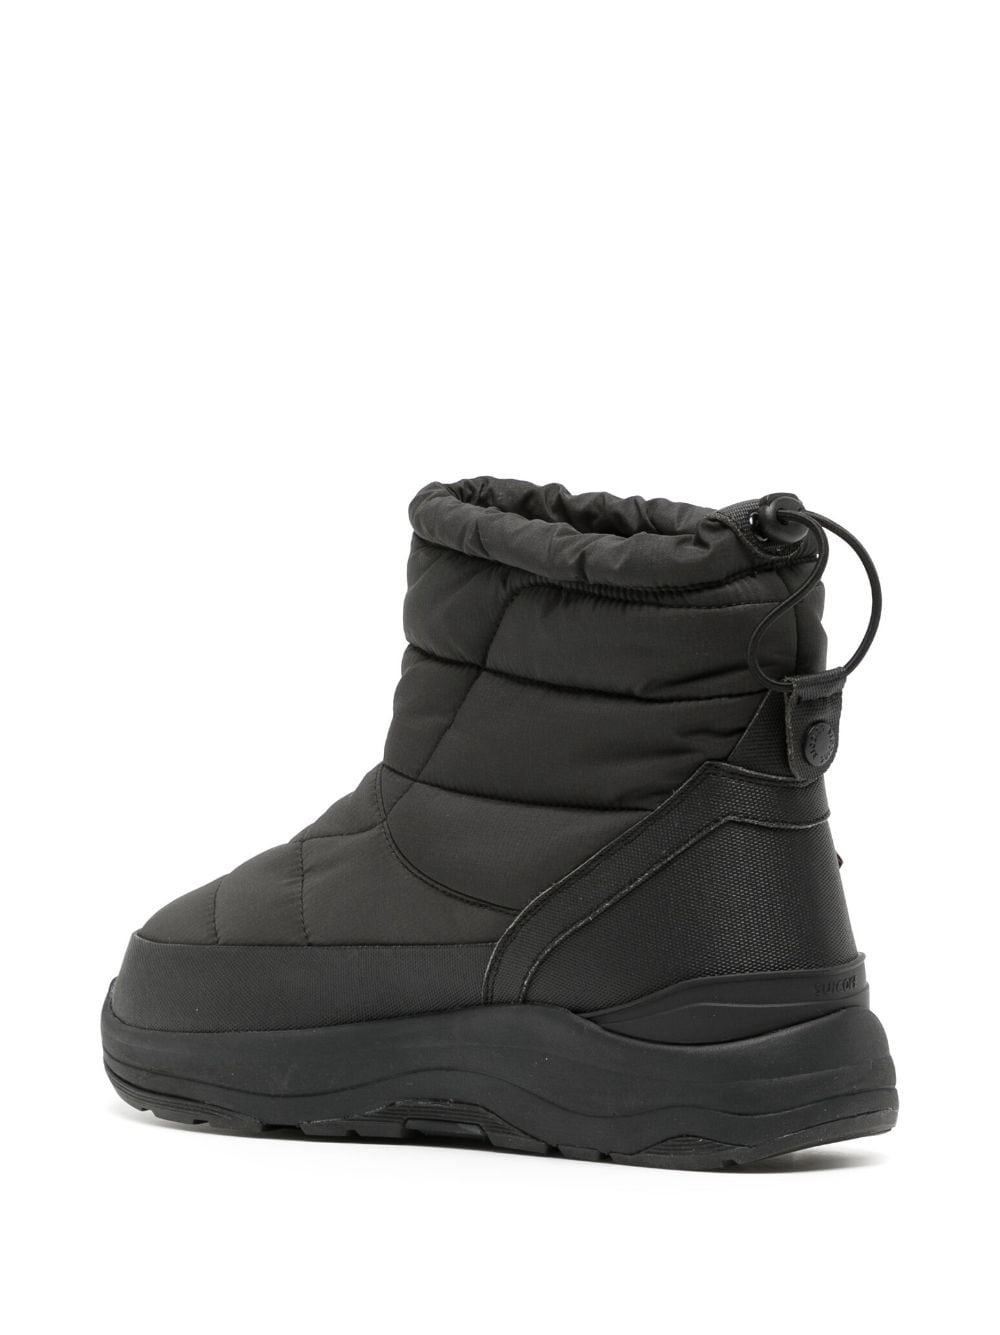 Bower padded snow boots - 3